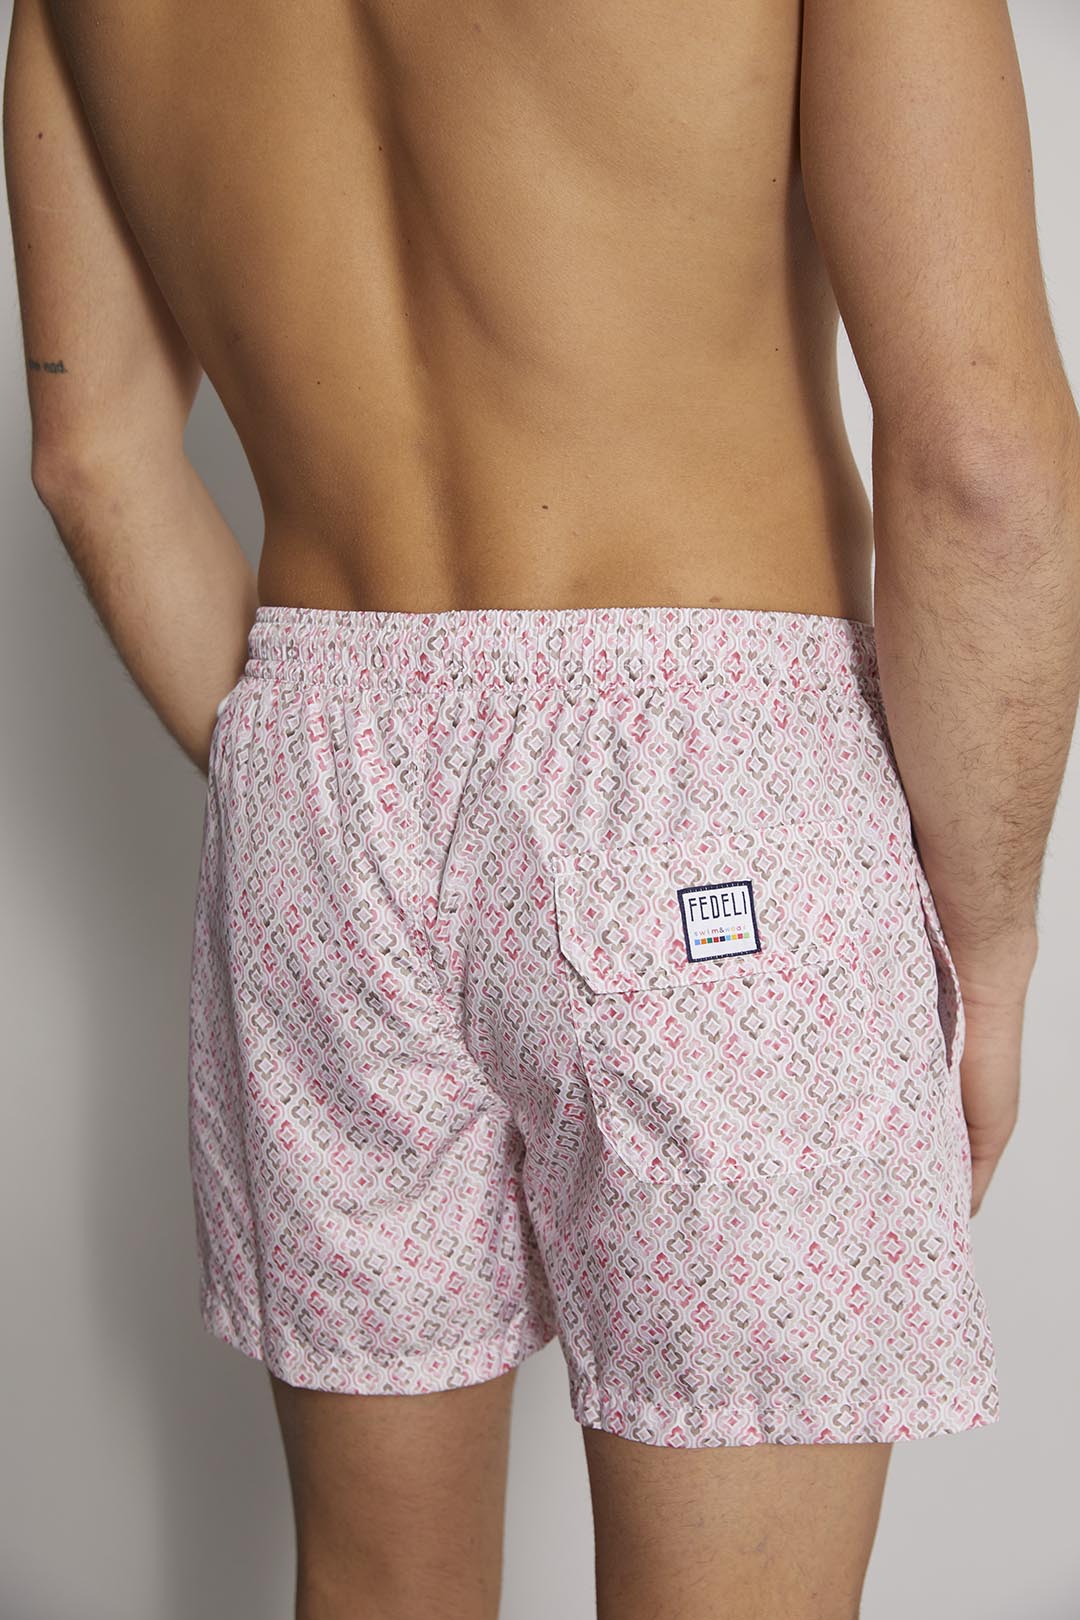 Madeira - the sustainable swim trunk - spring pattern